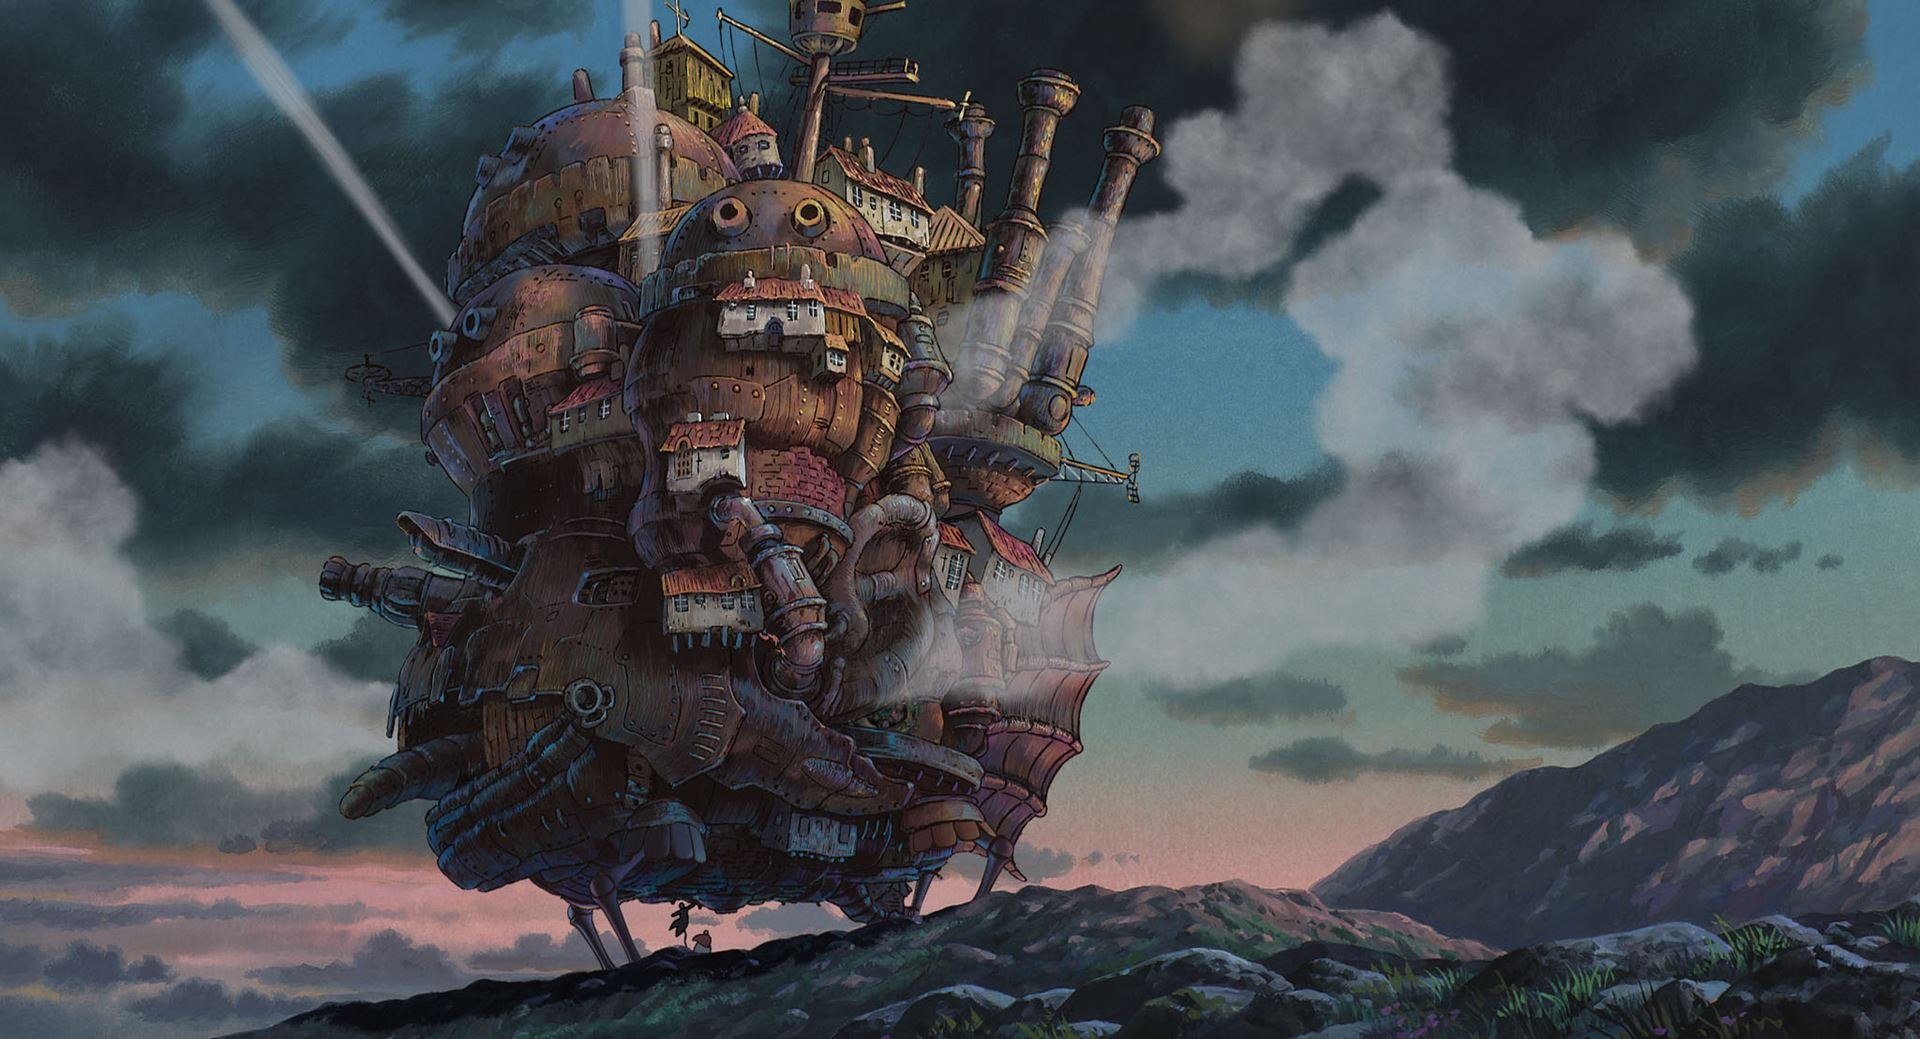 howls moving castle movie full free pm;ome